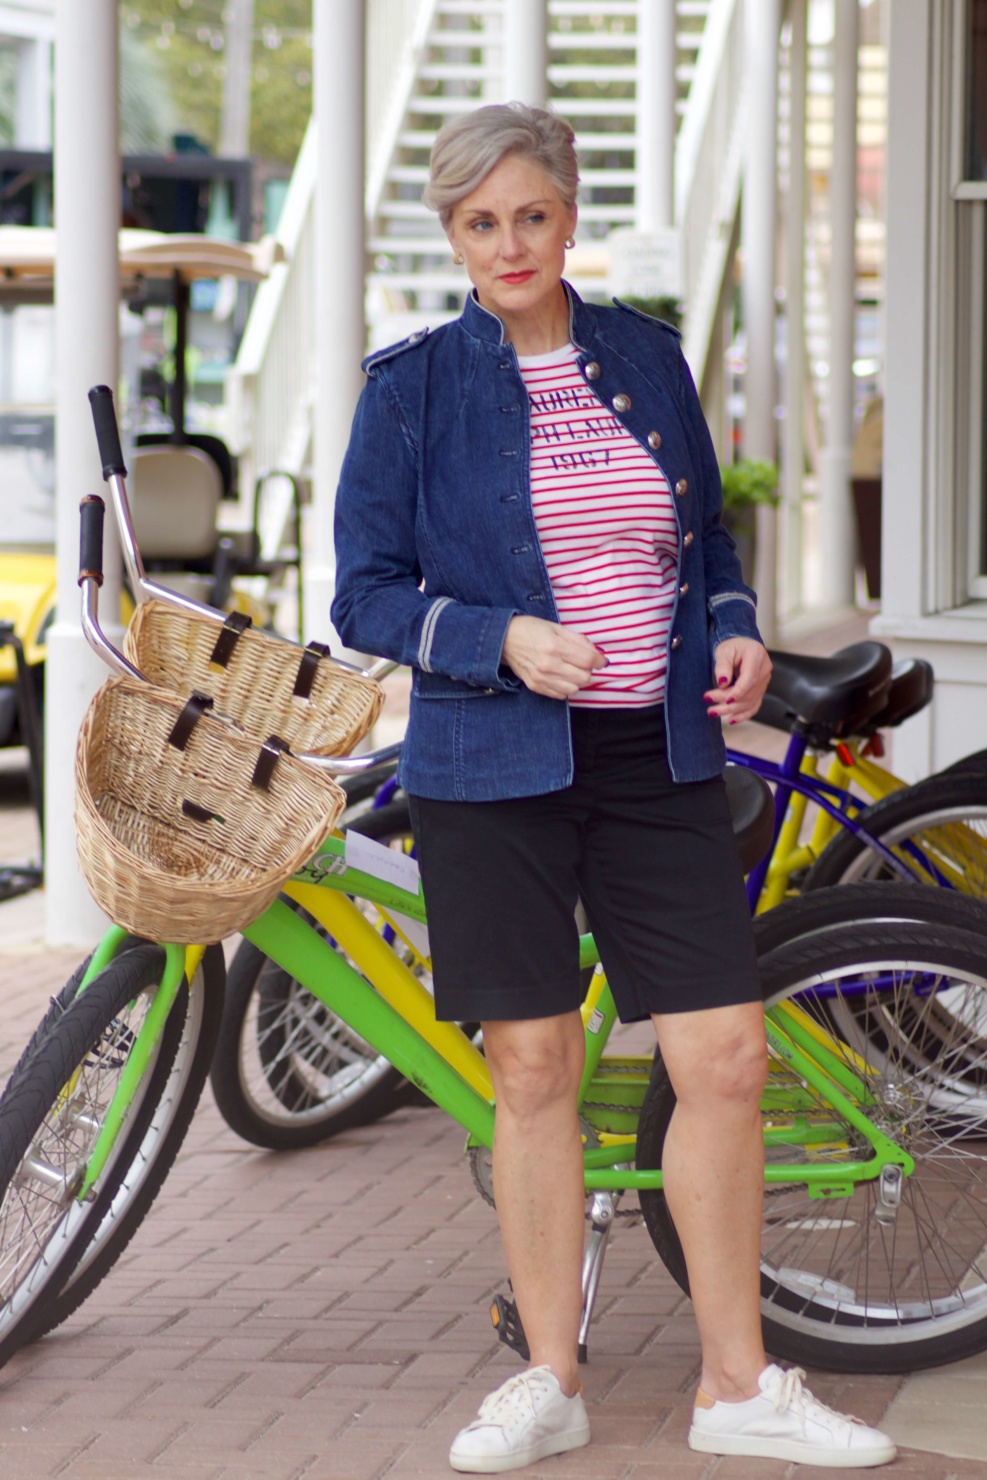 beth from Style at a Certain Age wears a military inspired denim jacket, red stripe tee, black bermuda shorts, and white tennis shoes